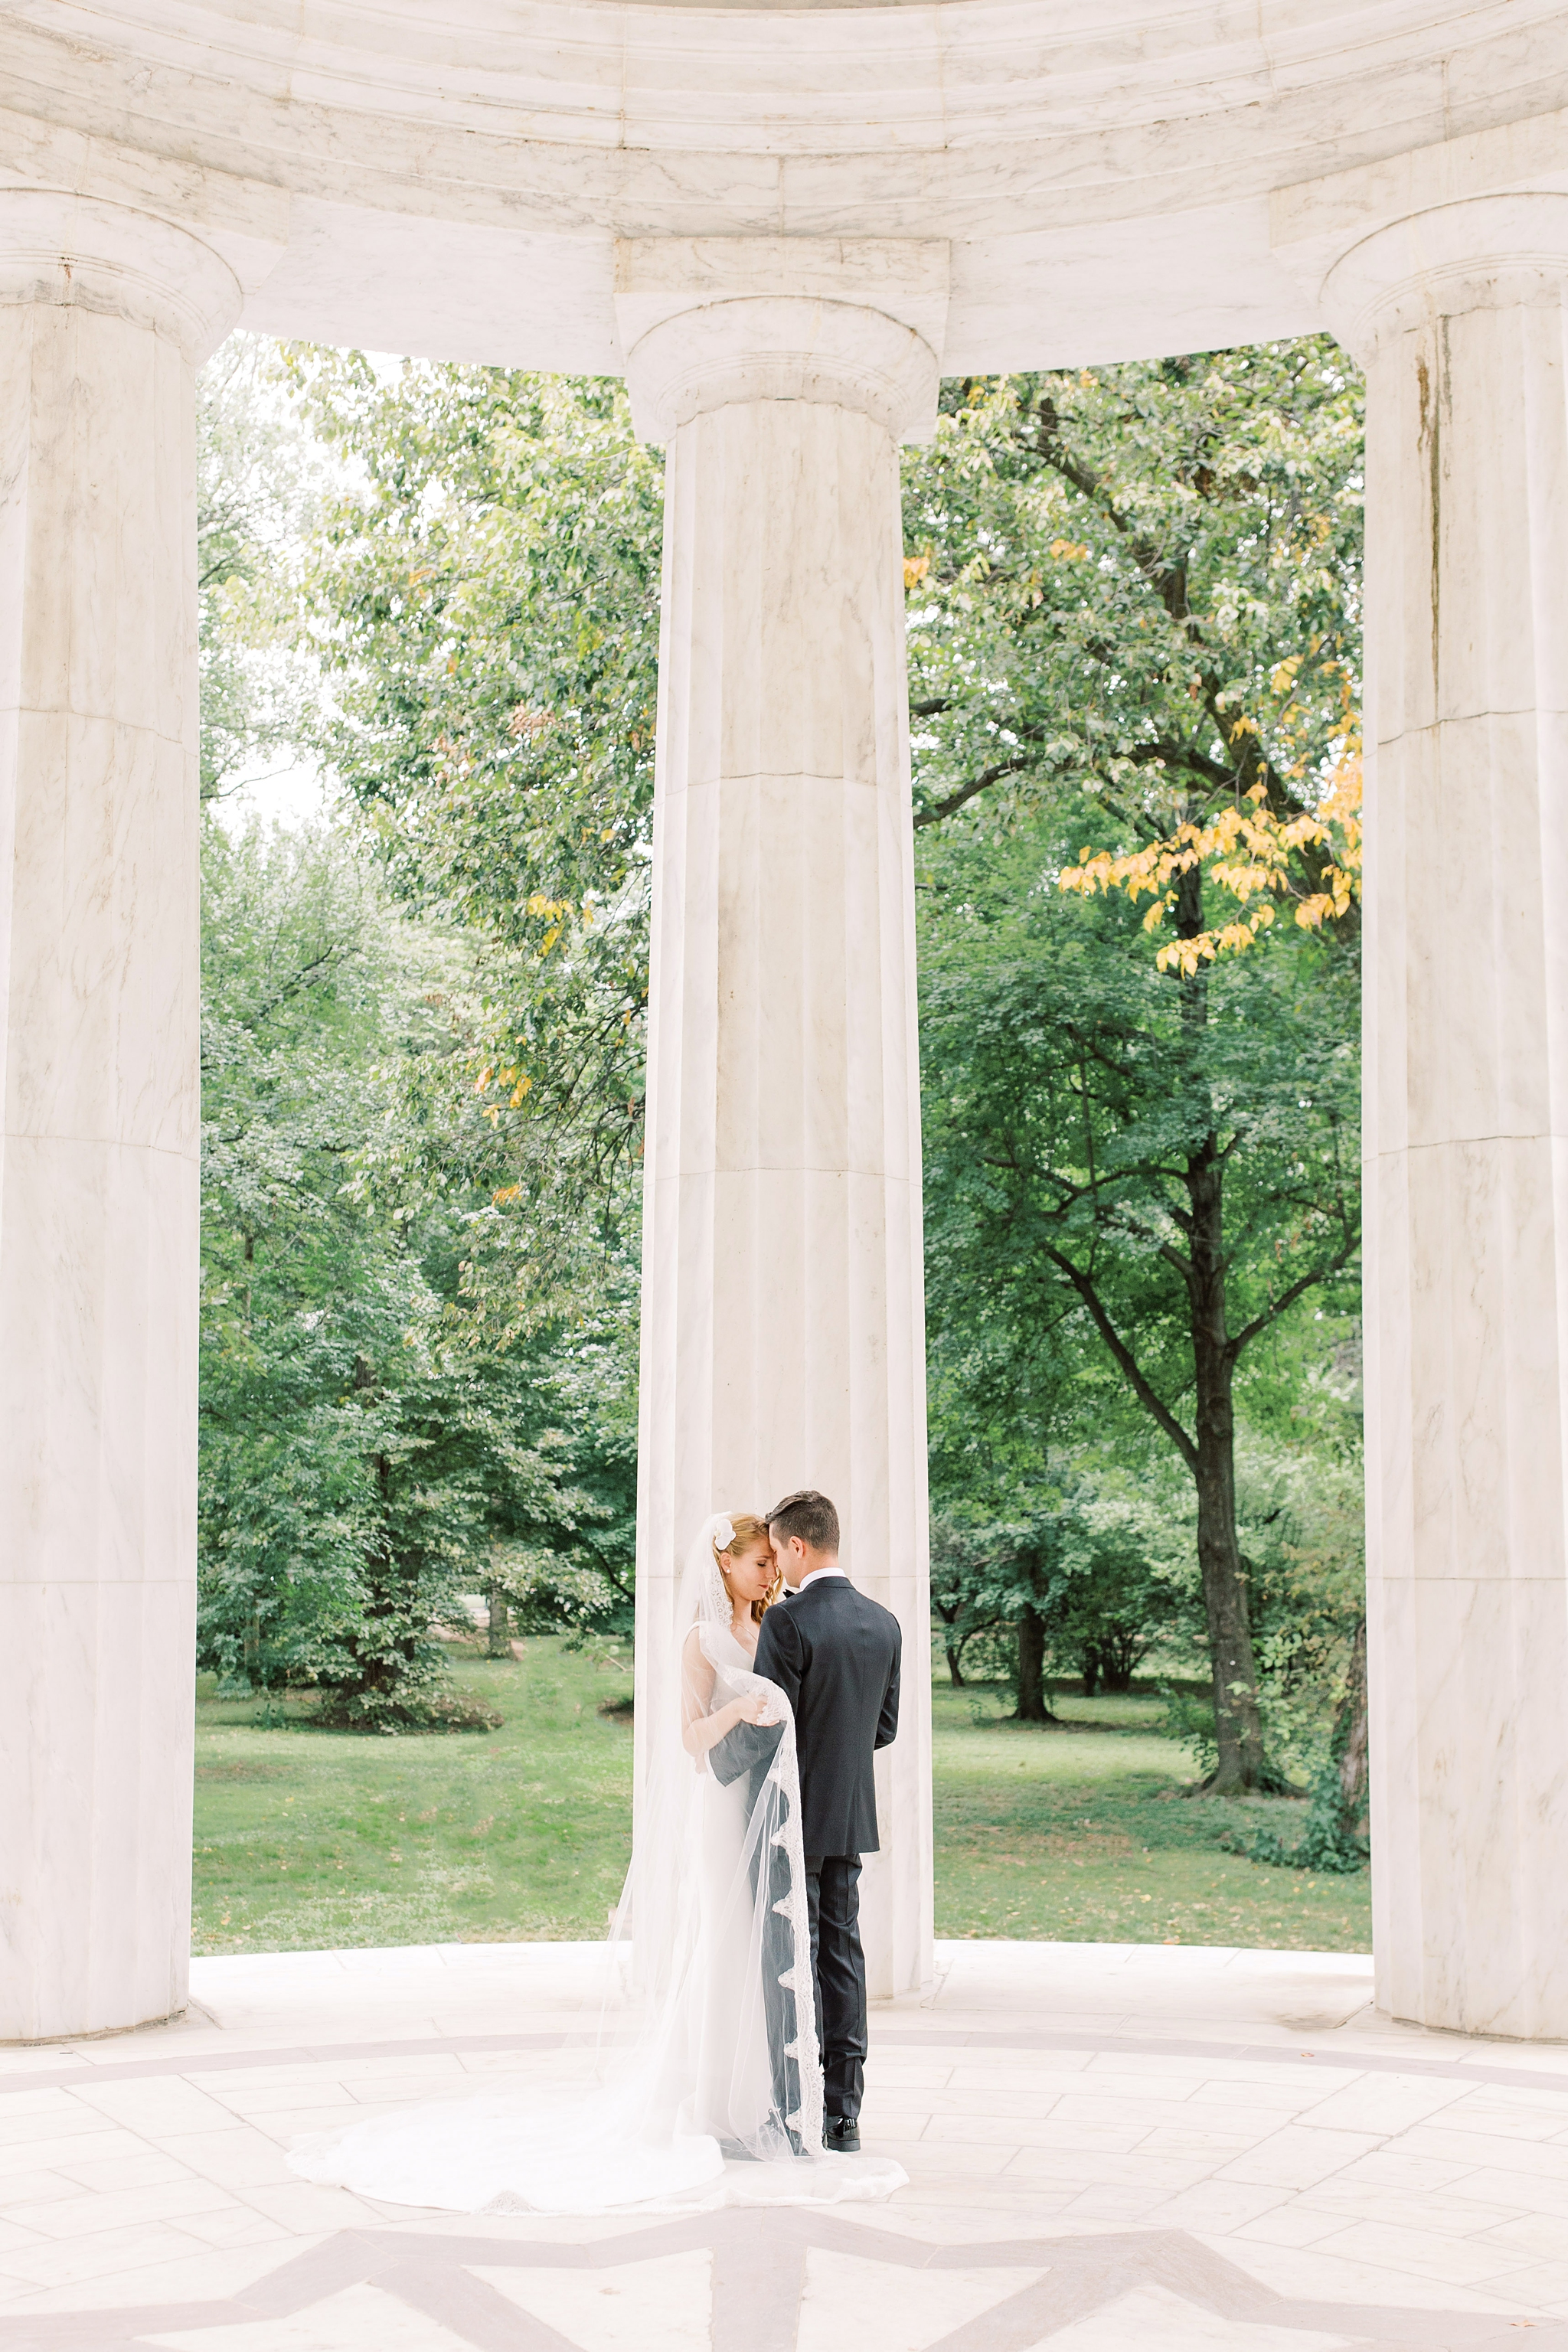 A colorful summer wedding at District Winery in Washington, DC with portraits at the Lincoln Memorial and DC War Memorial.